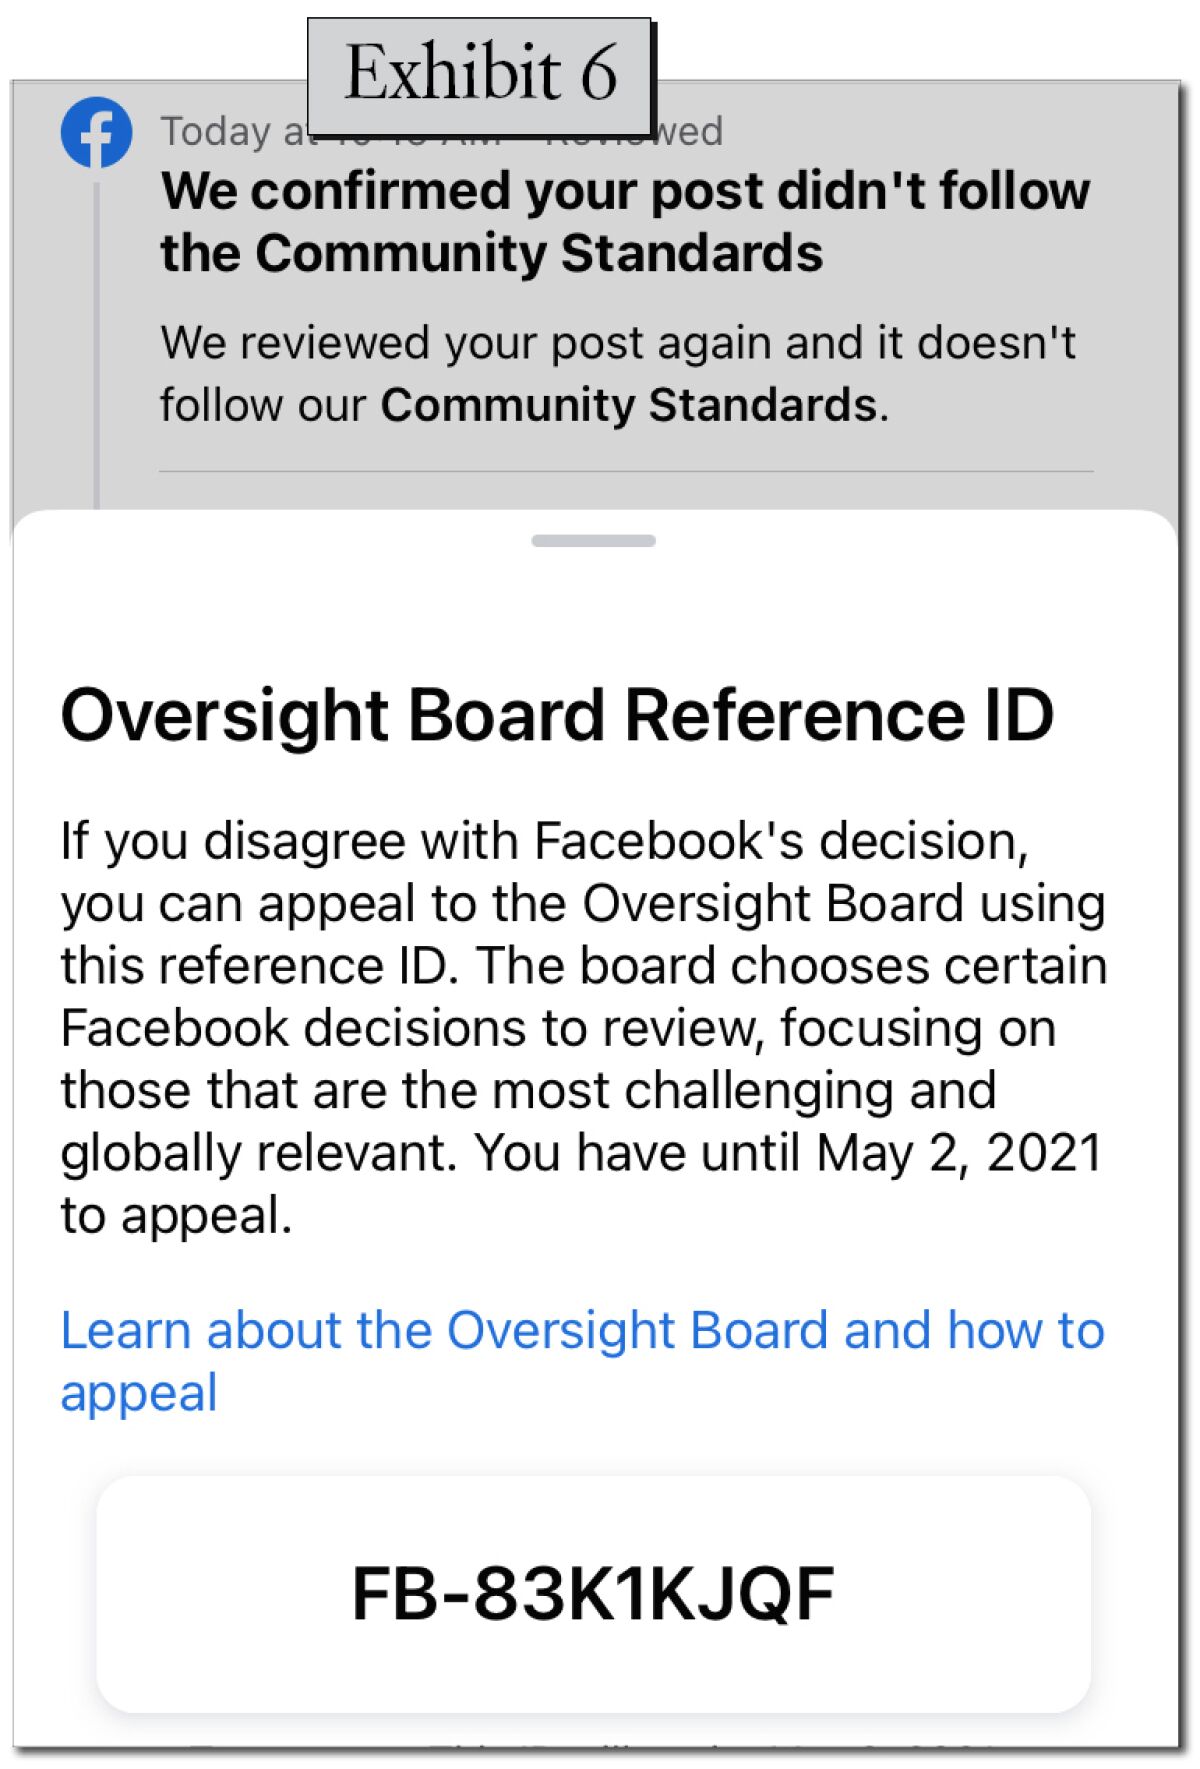 A notification witha "Oversight Board" reference ID.